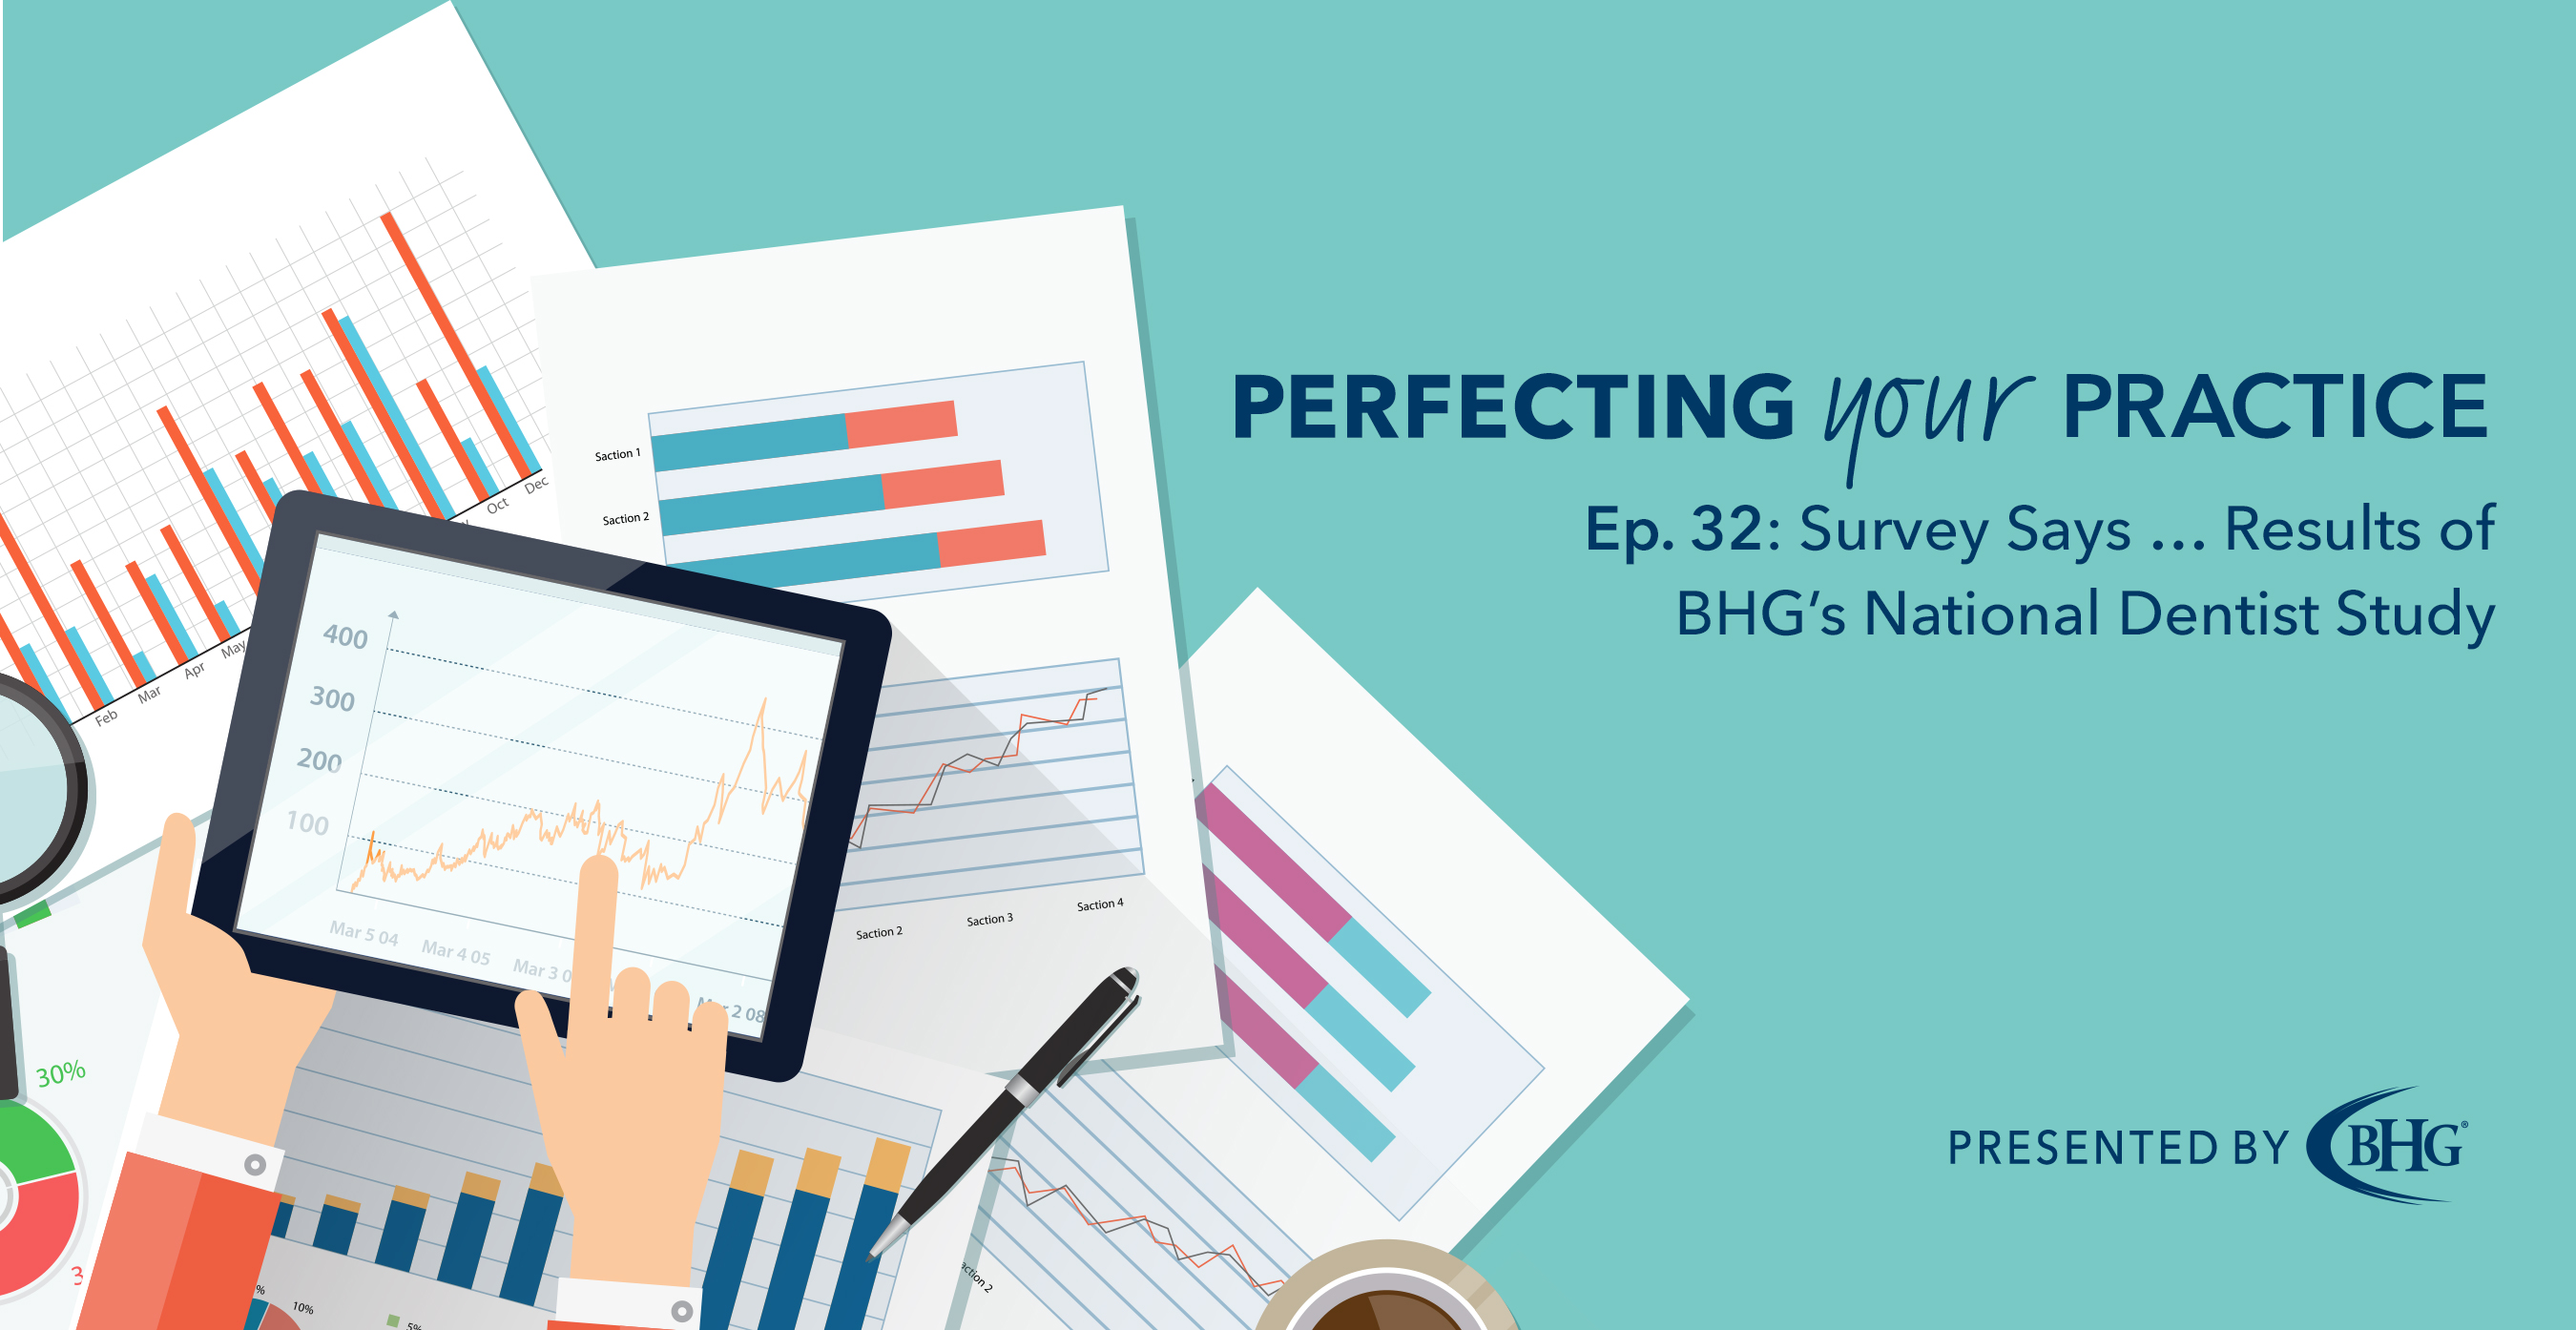 Bankers Healthcare Group's Perfecting Your Practice Podcast Episode Roundup: Focus on Dentistry